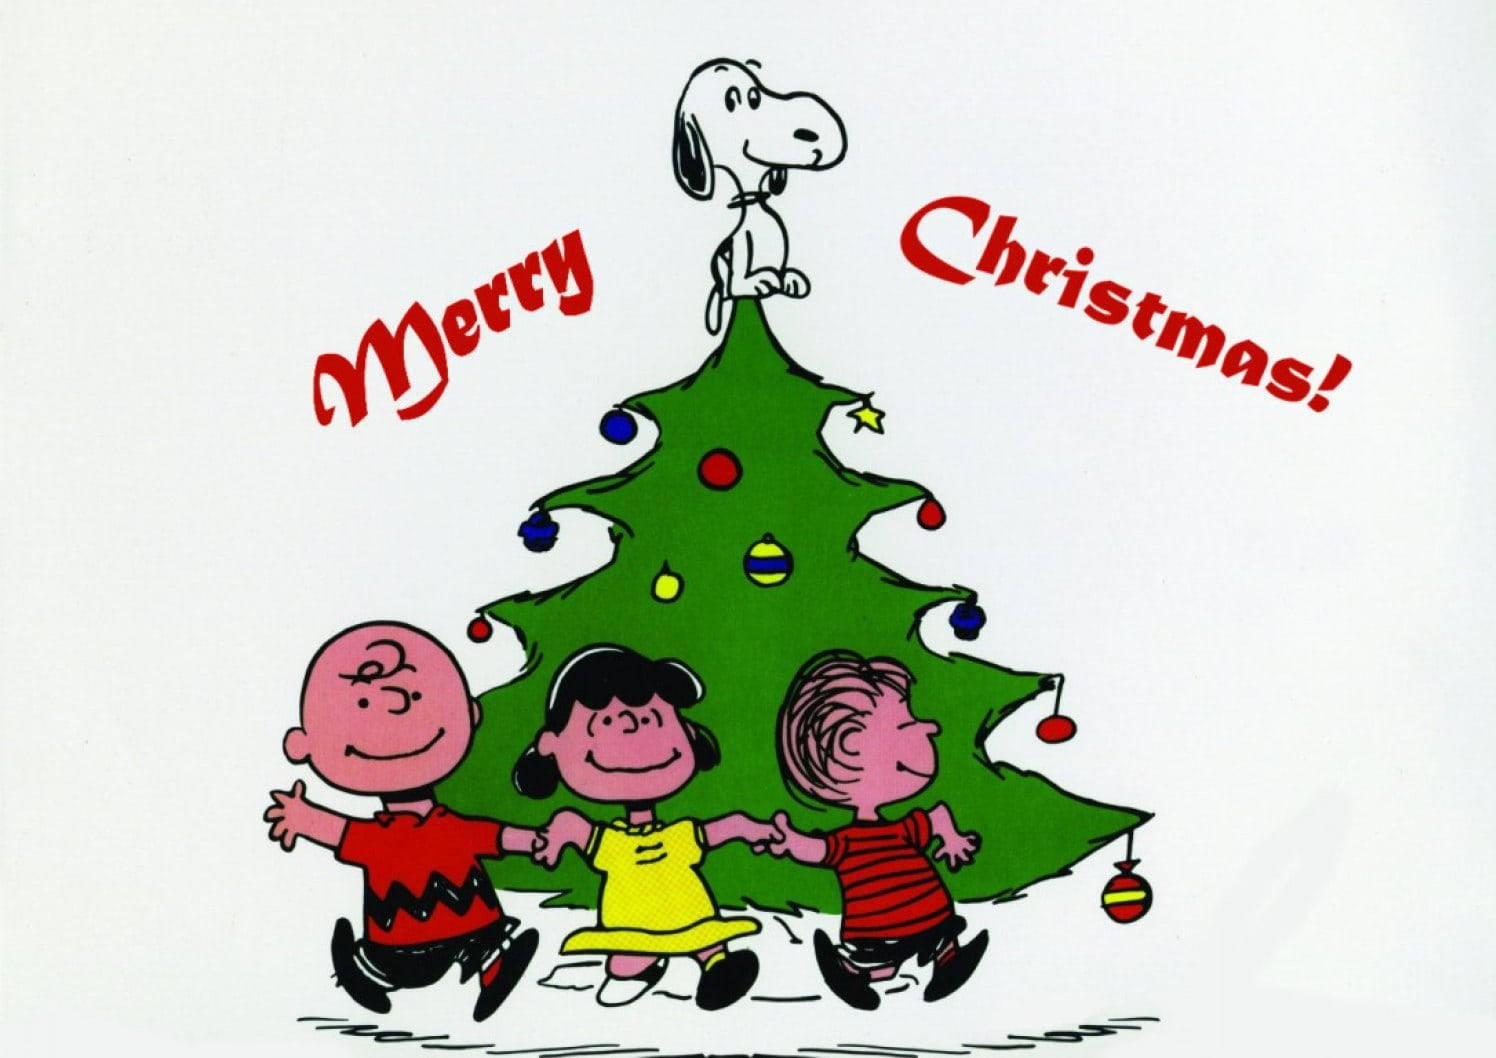 Celebrate Christmas with Snoopy on your iPhone Wallpaper